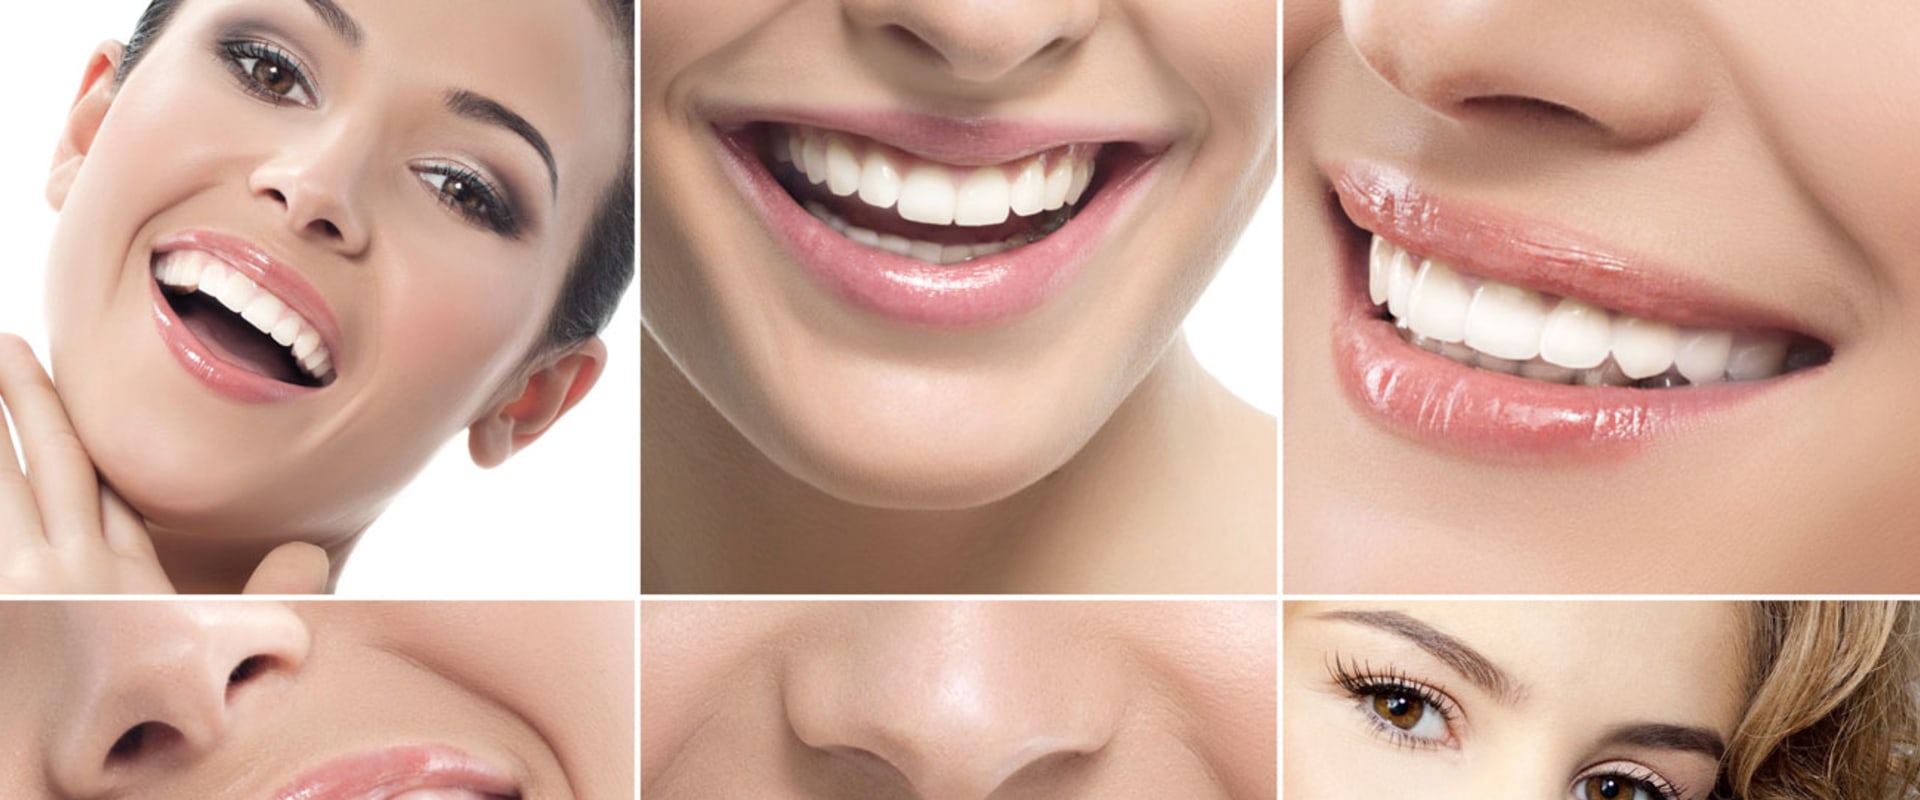 When to see a prosthodontist?